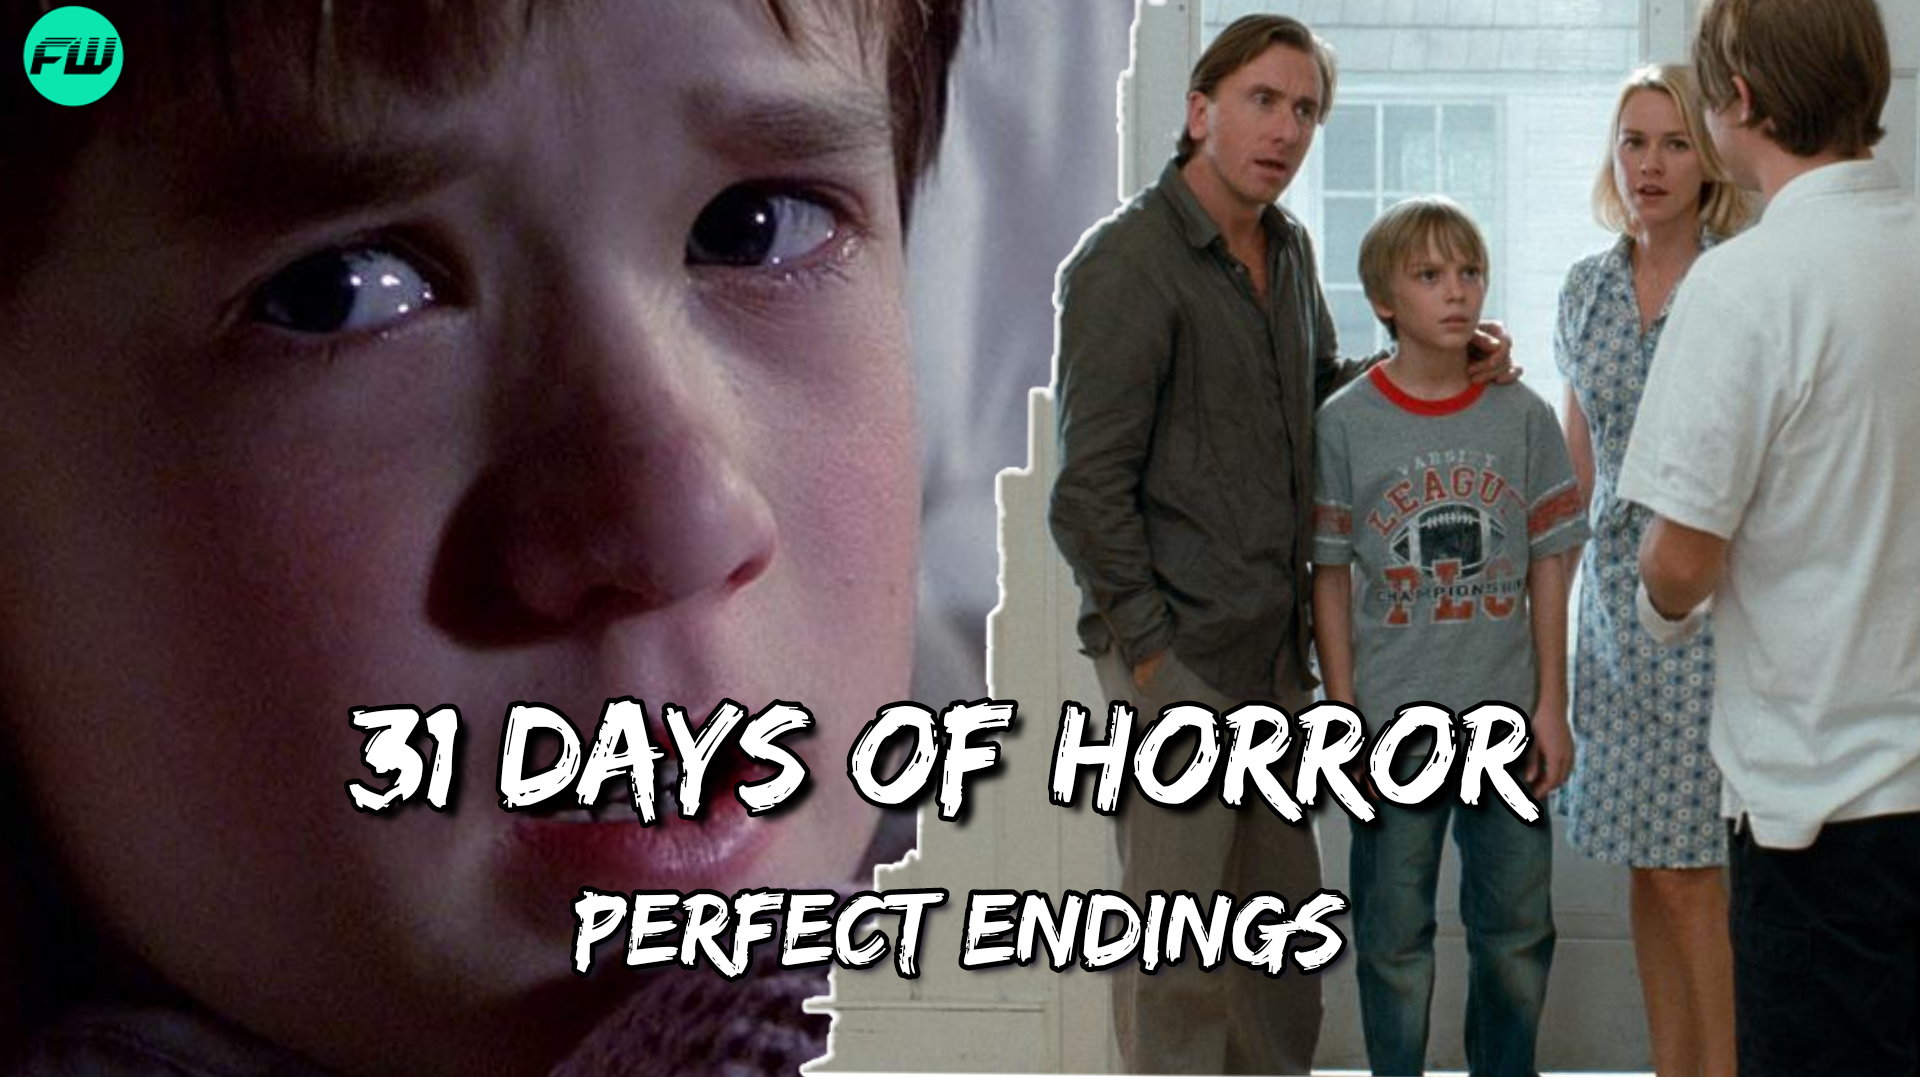 31 Days of Horror: 5 Perfect Horror Endings That Will Shock and Scare You